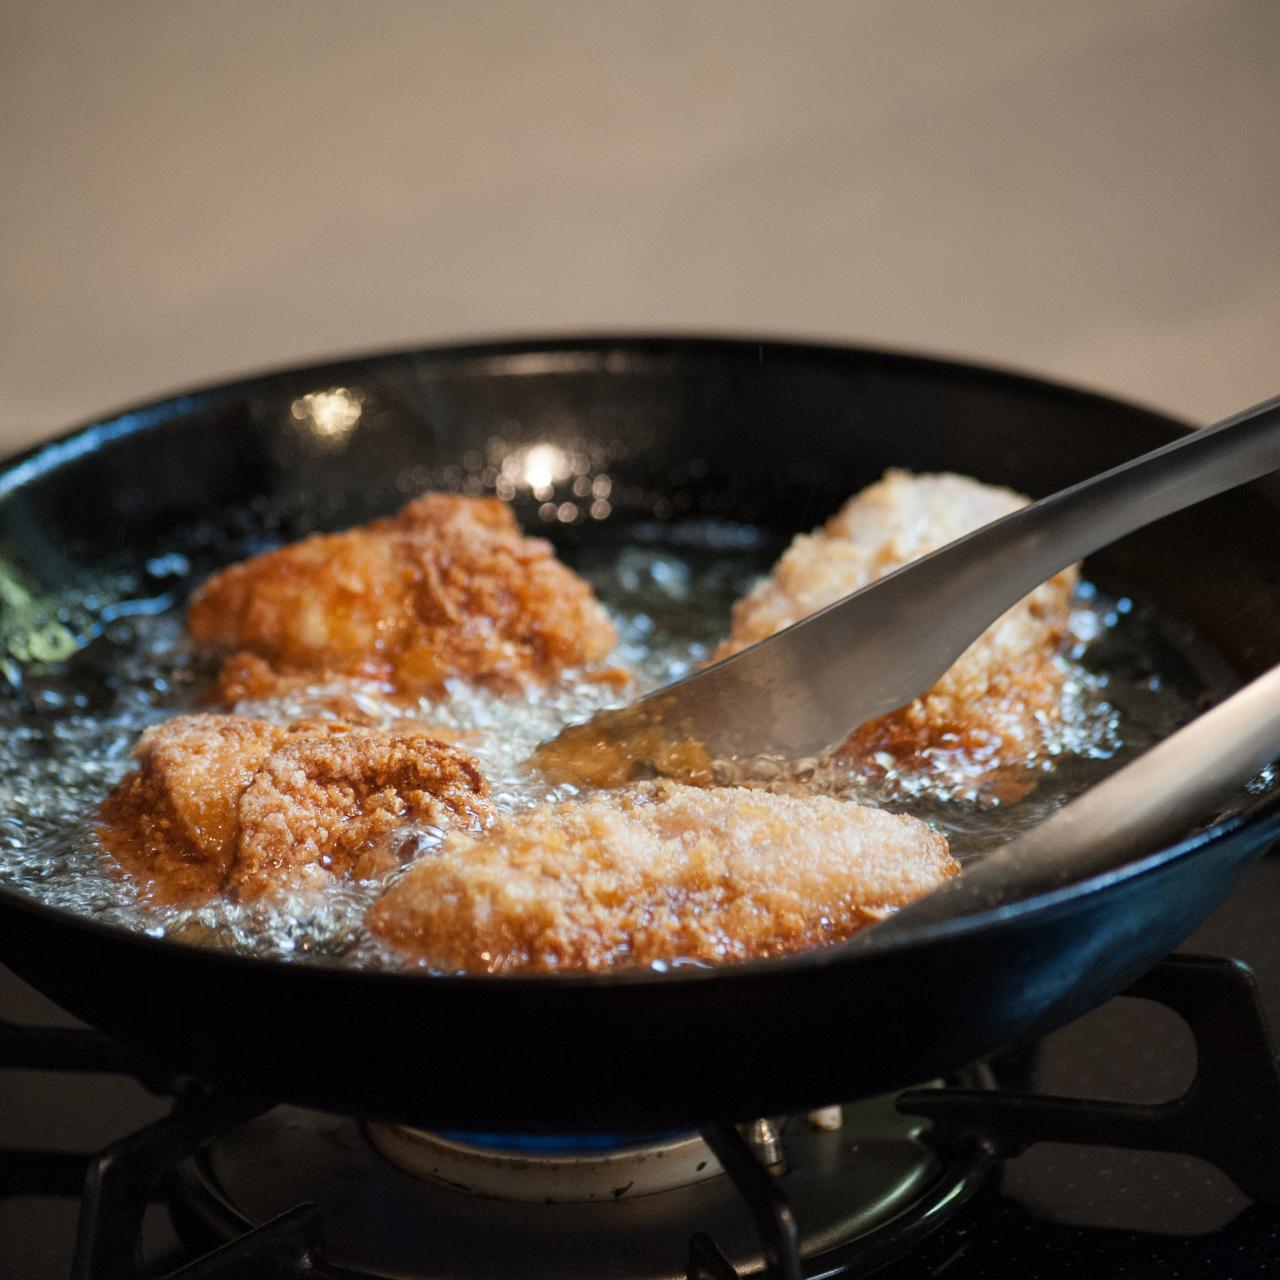 Pan frying, shallow frying, deep frying: what's the difference?